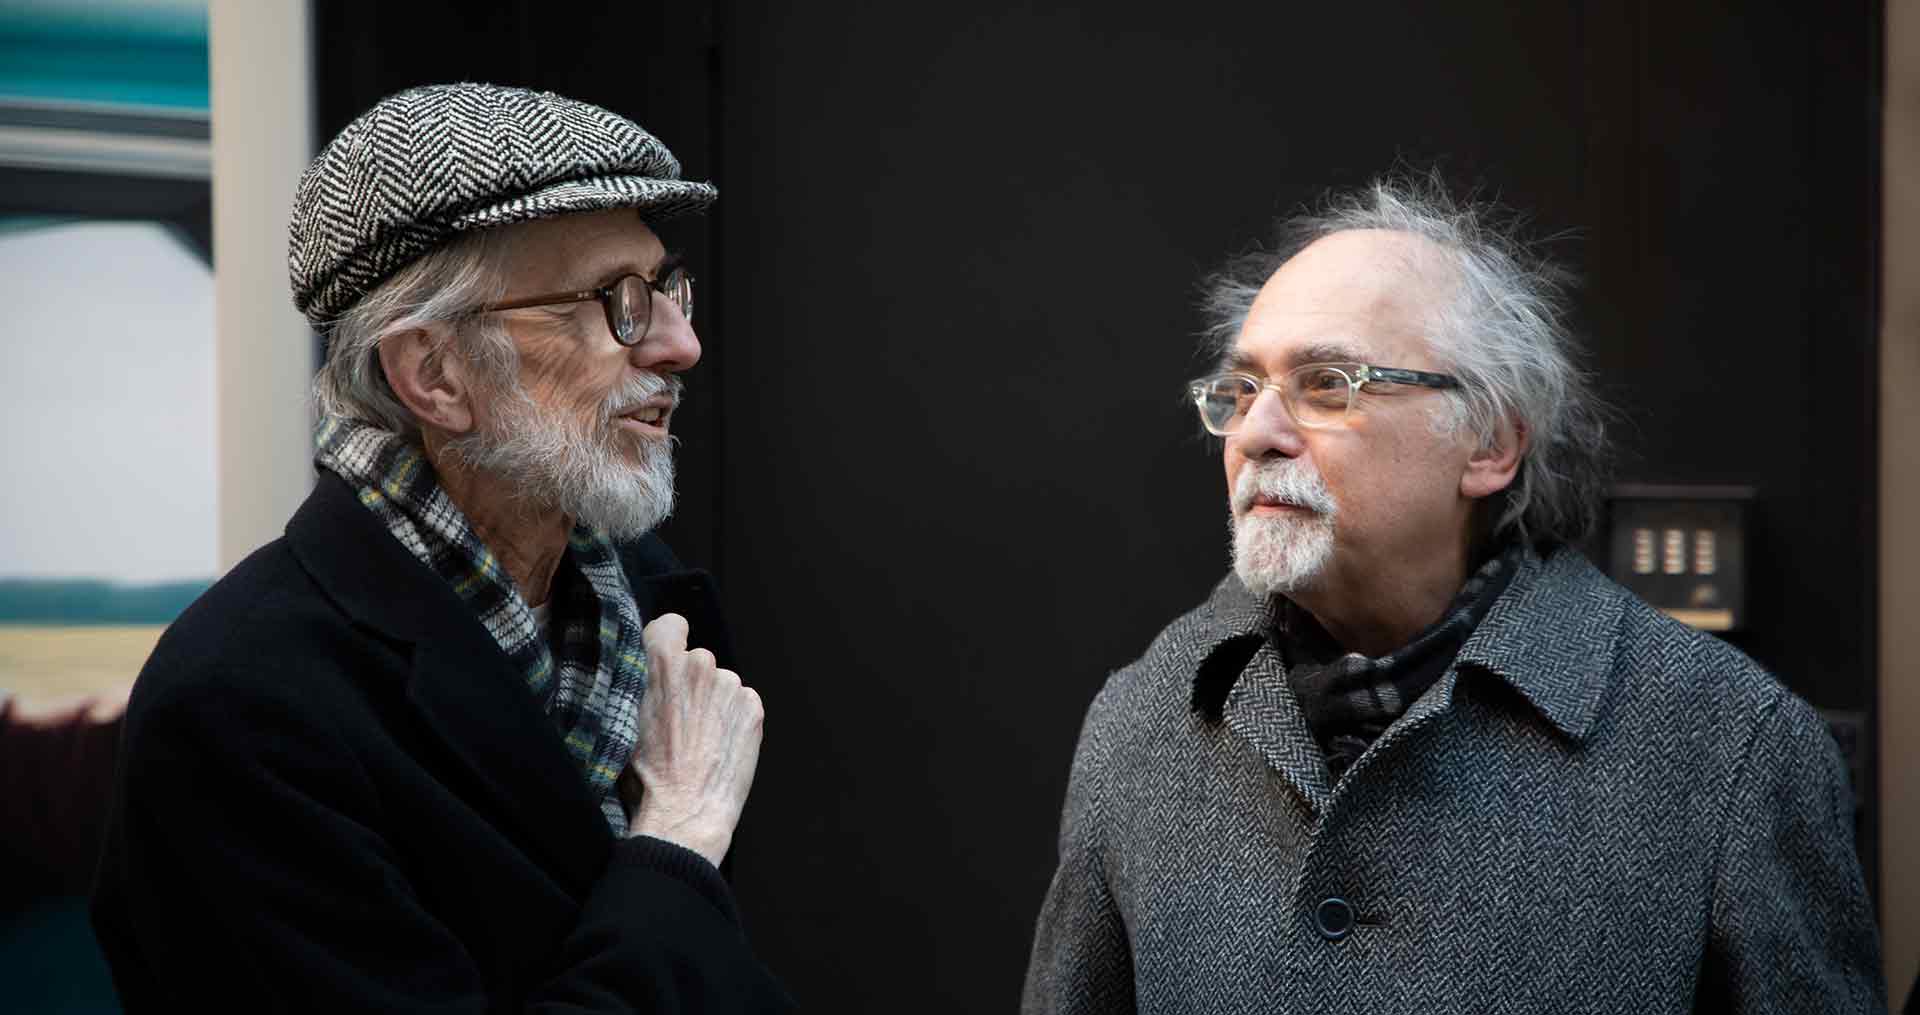 A photo of R. Crumb and Art Spiegelman in New York, dated 2019.